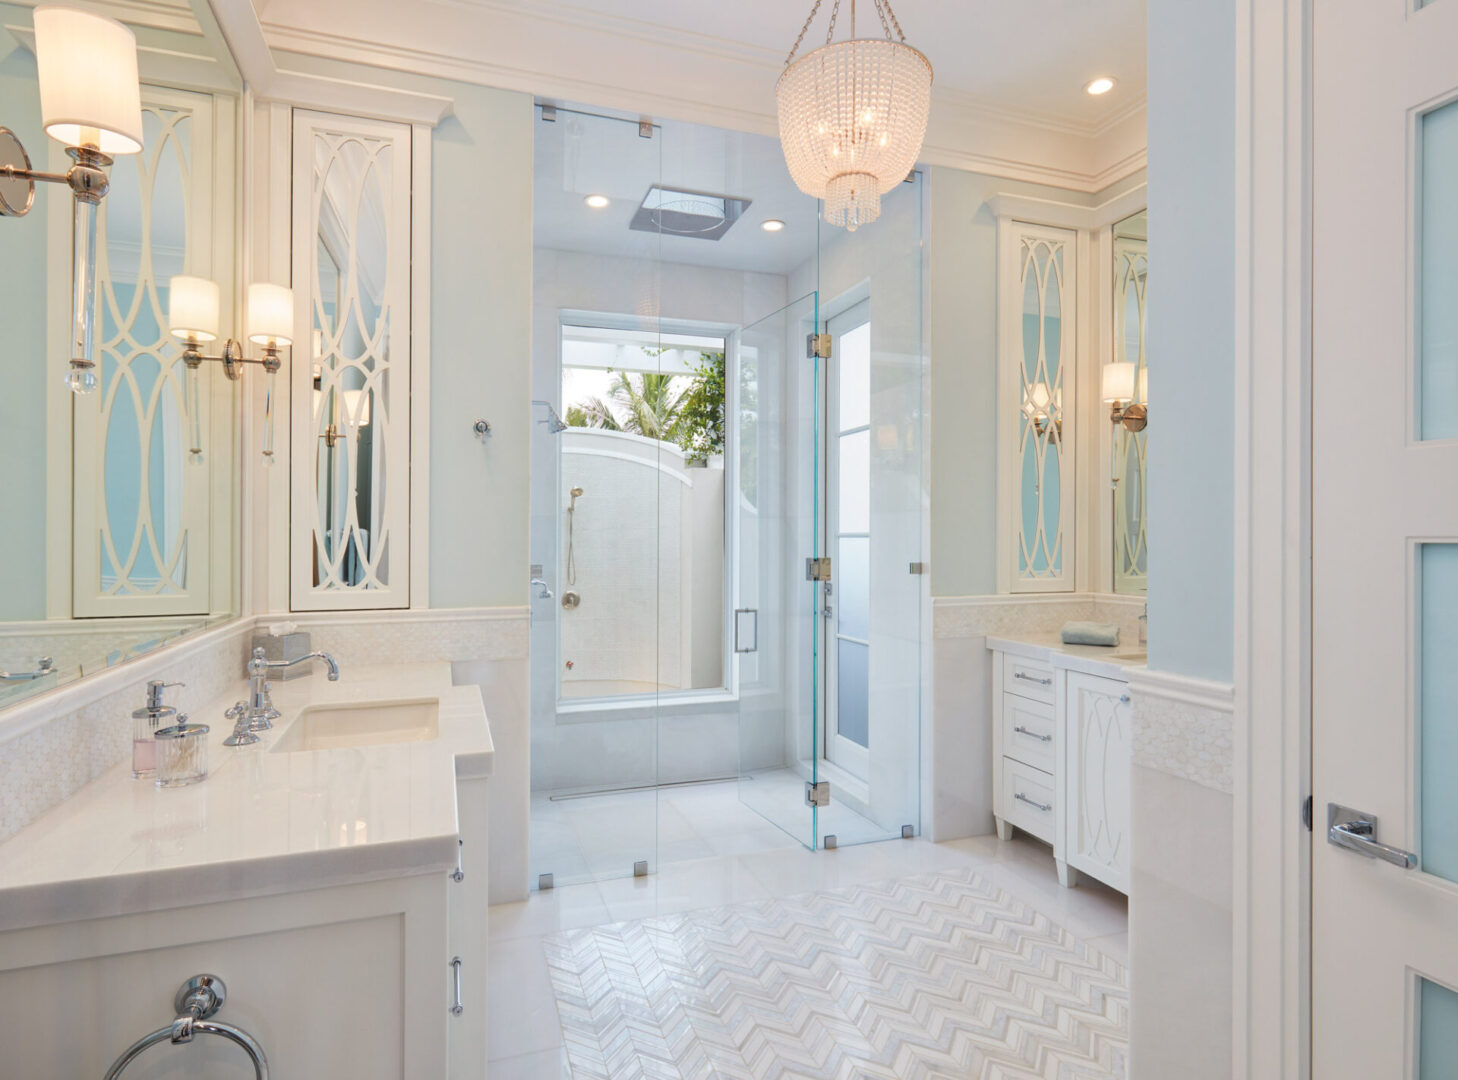 A bathroom with white tile and marble floors.